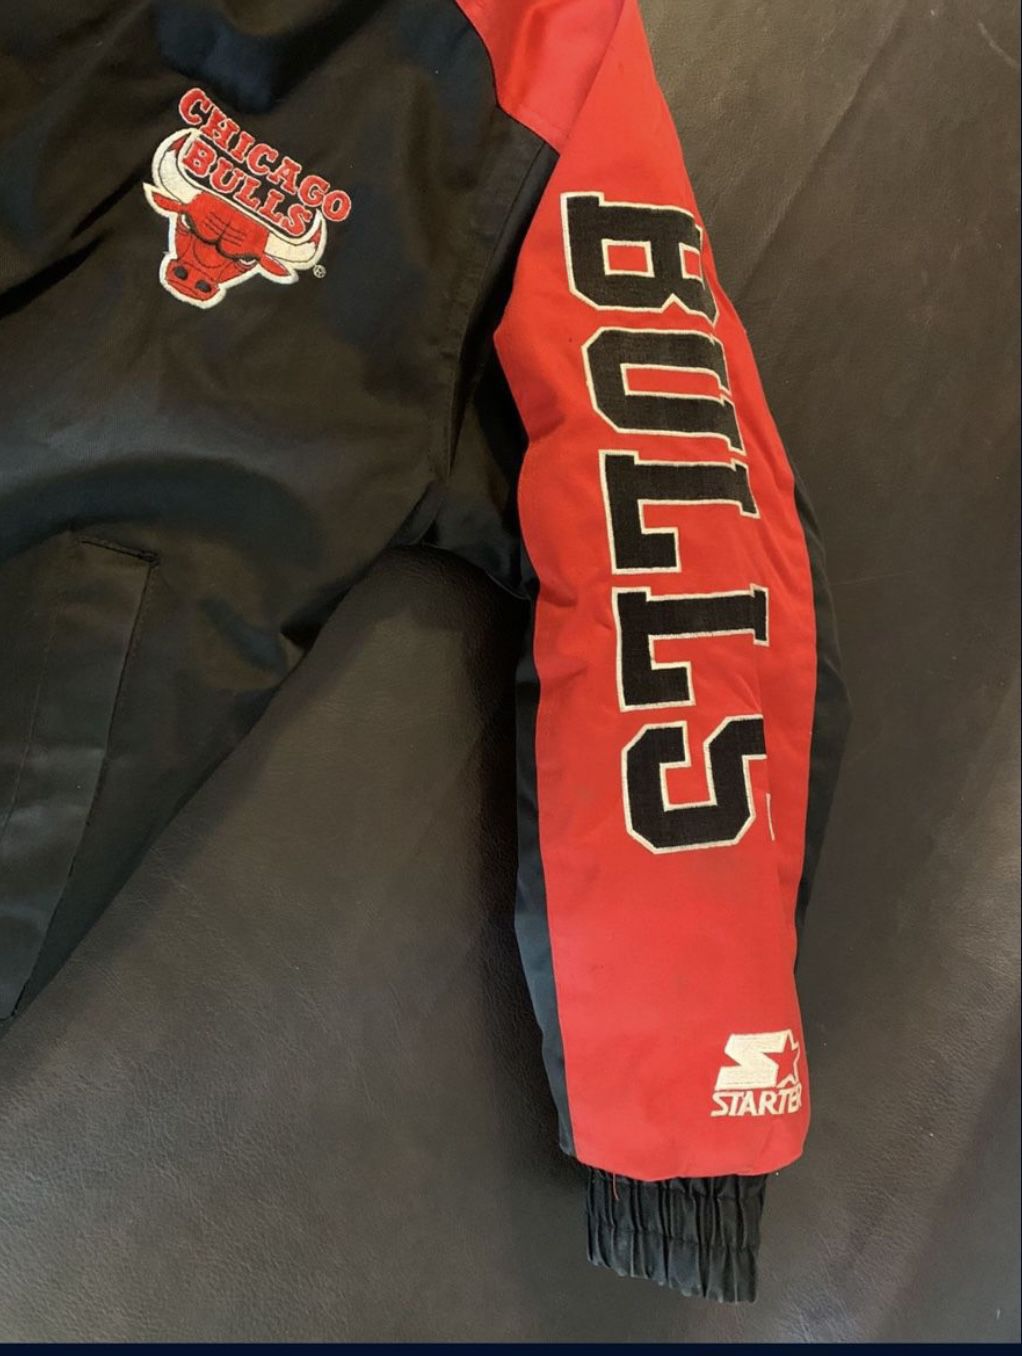 Levi NBA Chicago bulls Jean jacket for Sale in Mackinaw, IL - OfferUp